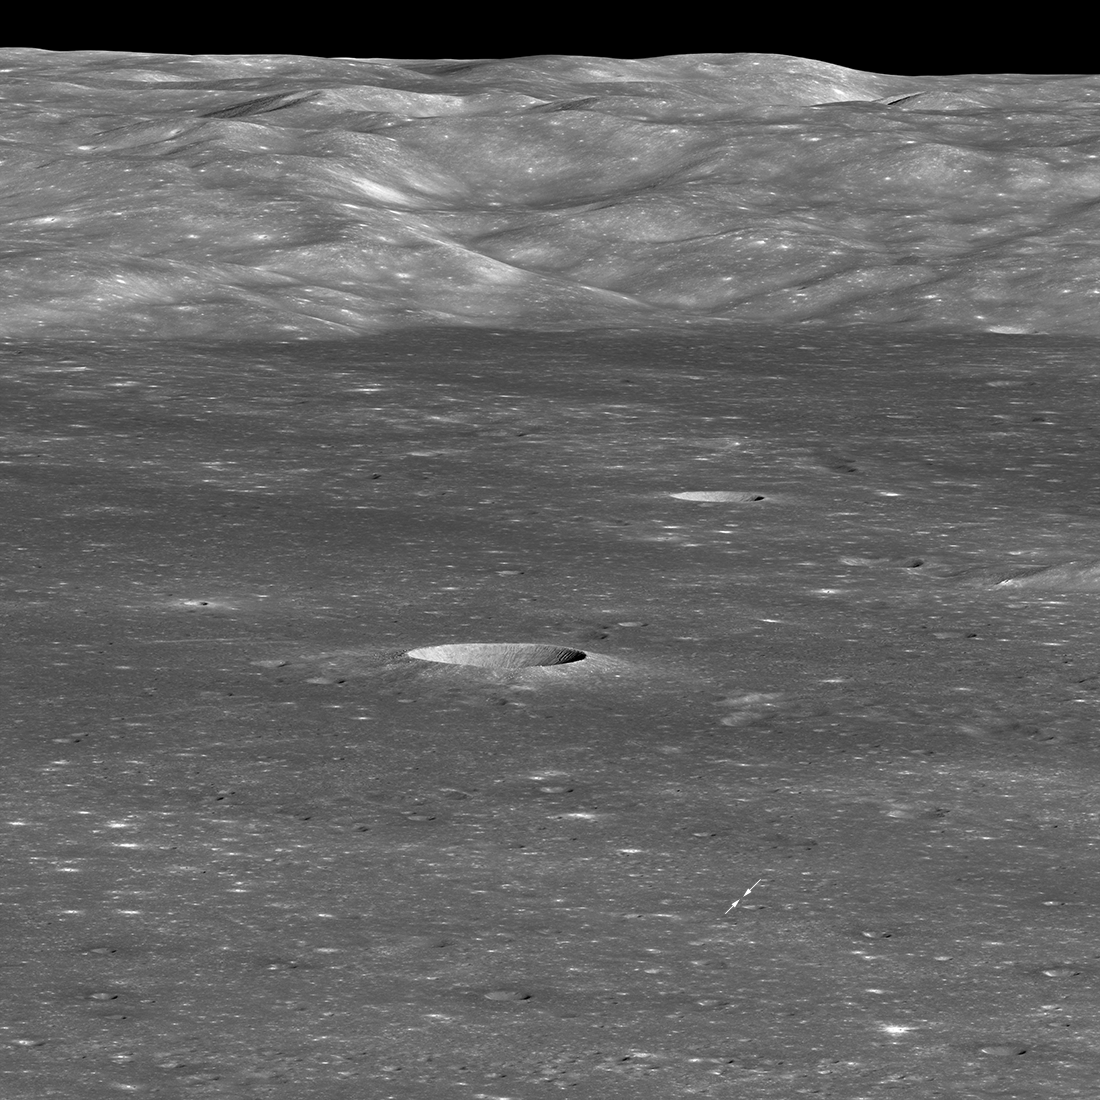 East to west limb view of Von Kármán crater